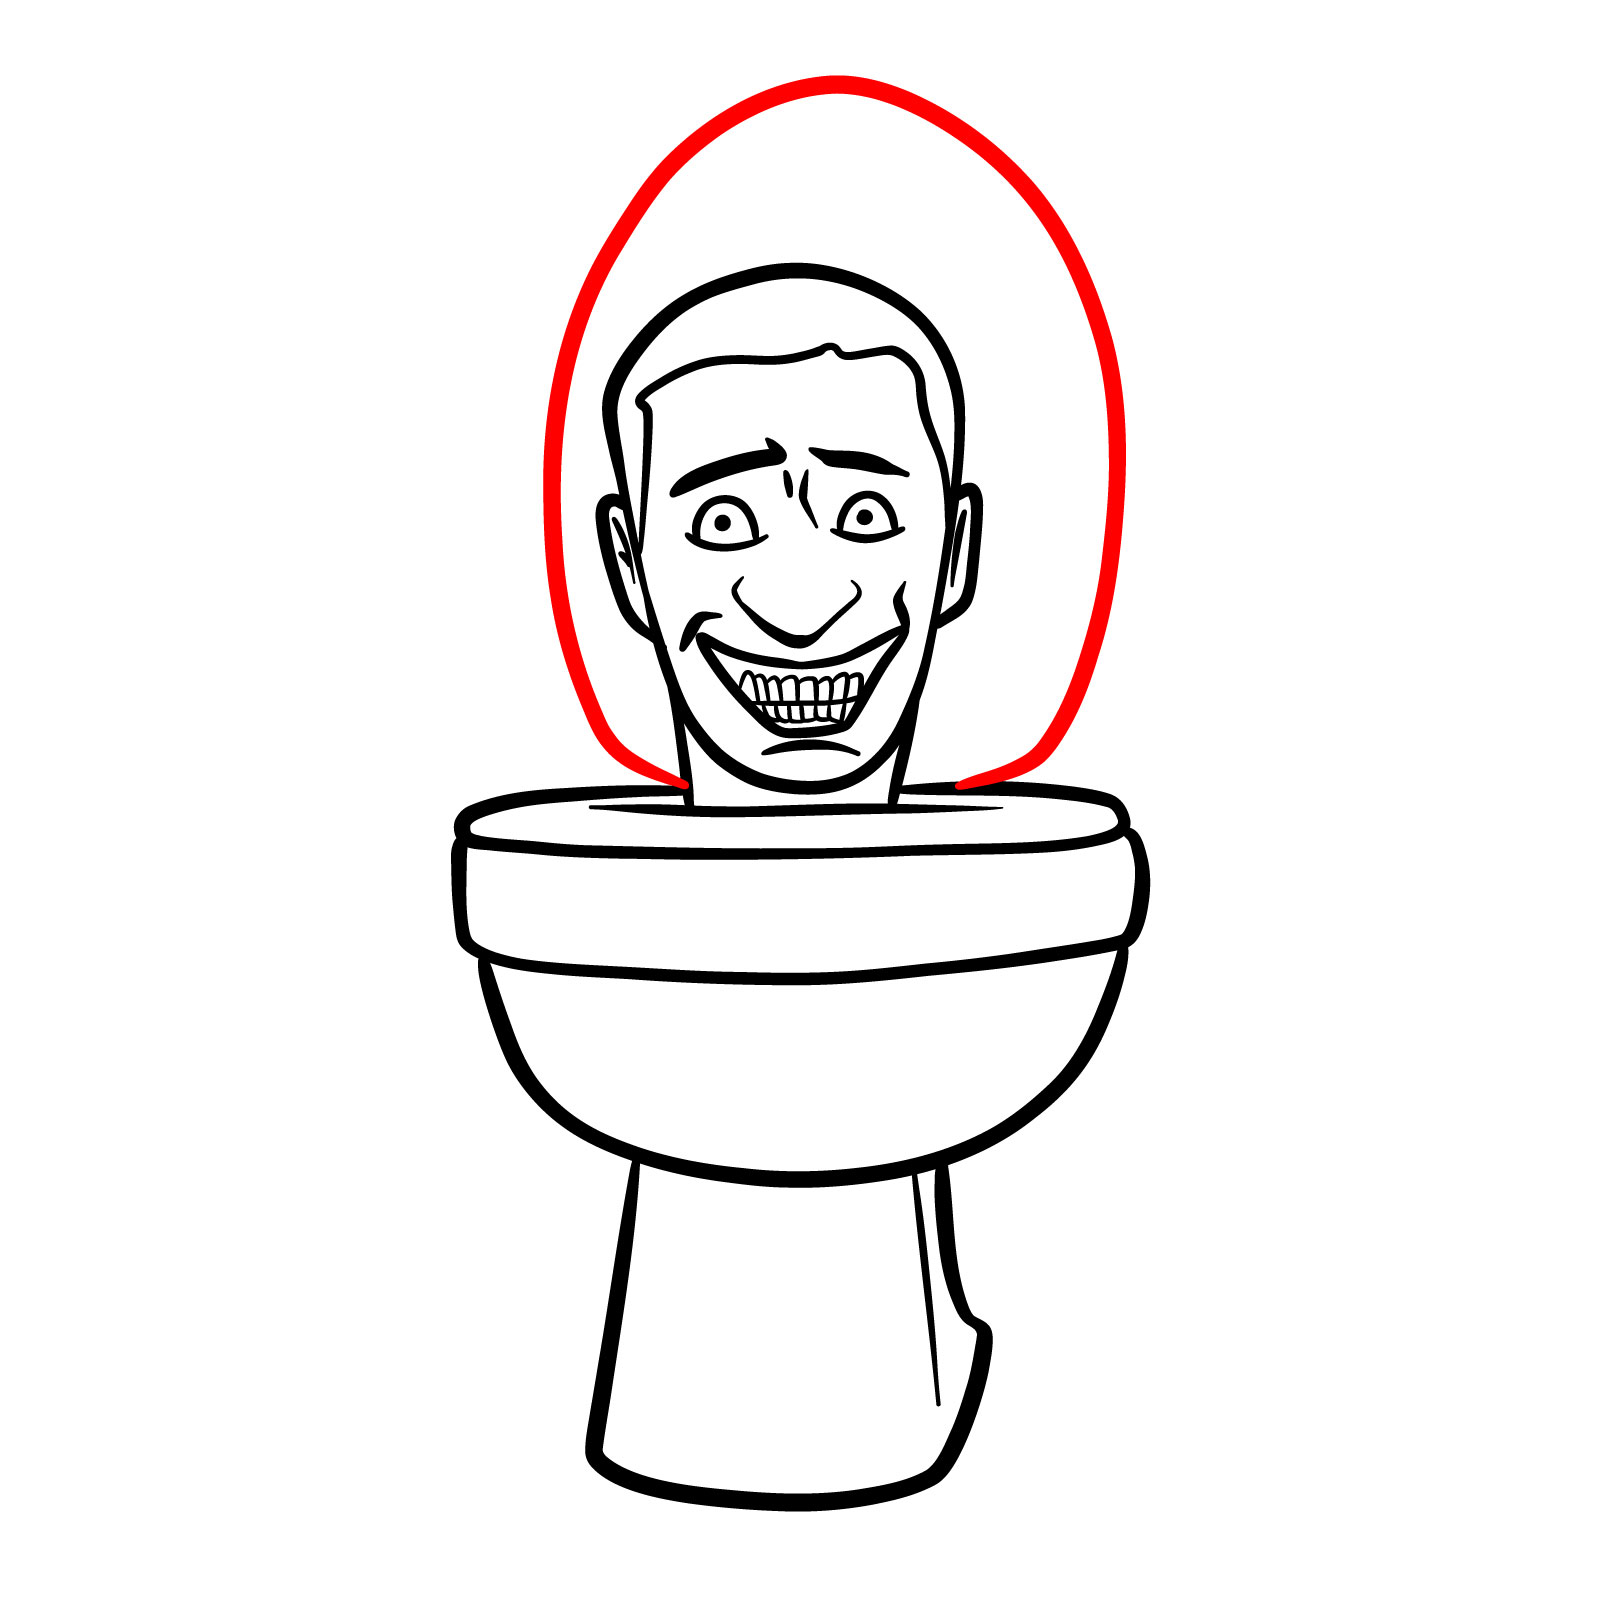 Sketching the lid for the Skibidi Toilet - step 10